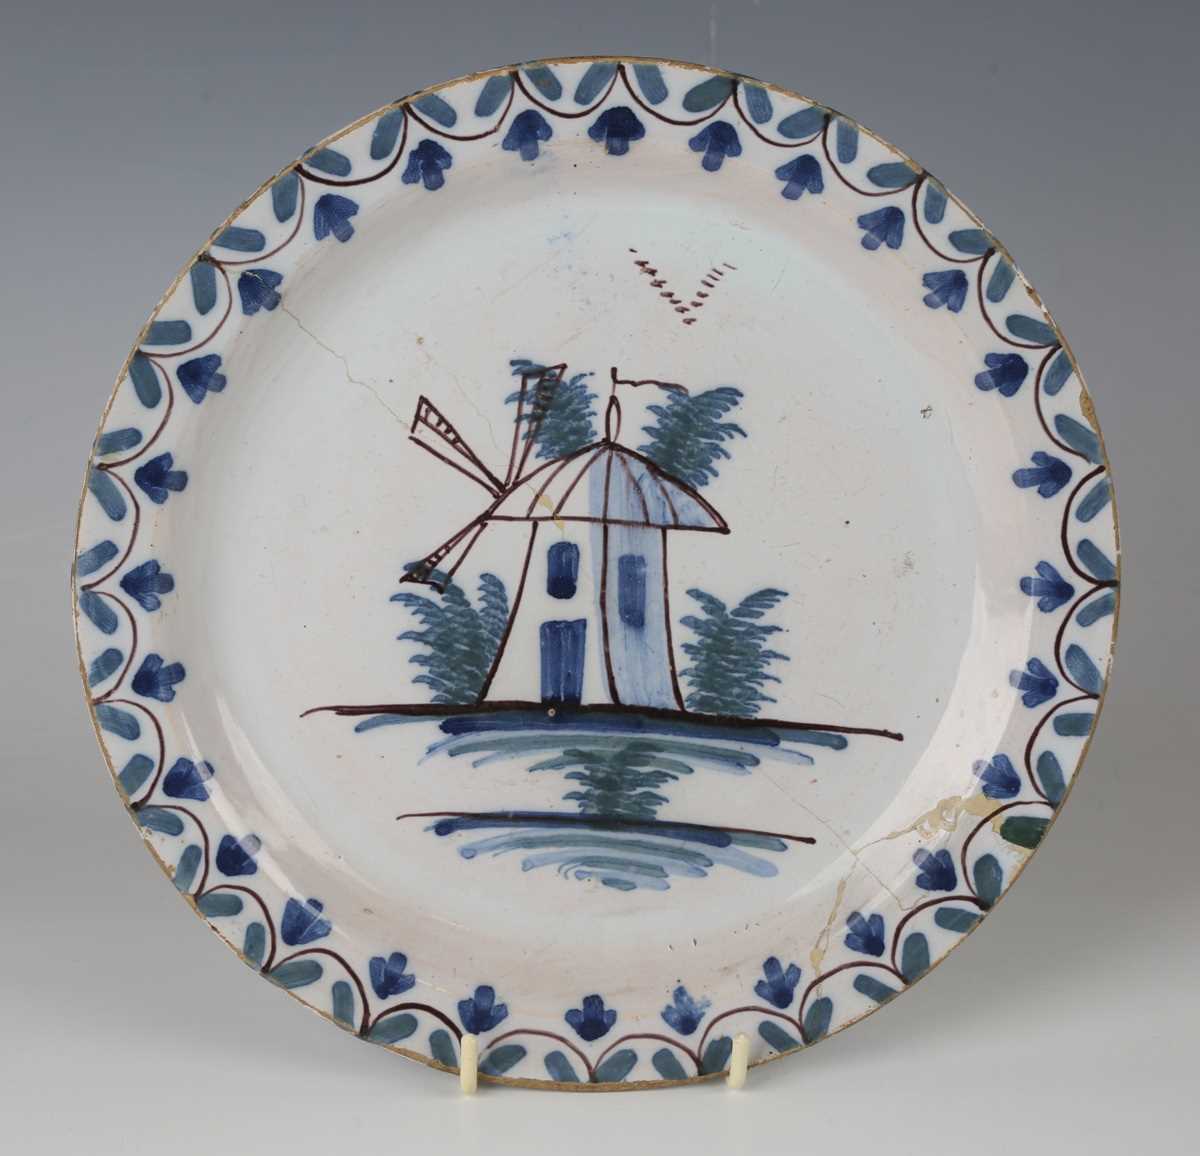 An English delft plate, Lambeth, circa 1770-85, painted in blue, green and manganese with a windmill - Image 4 of 23